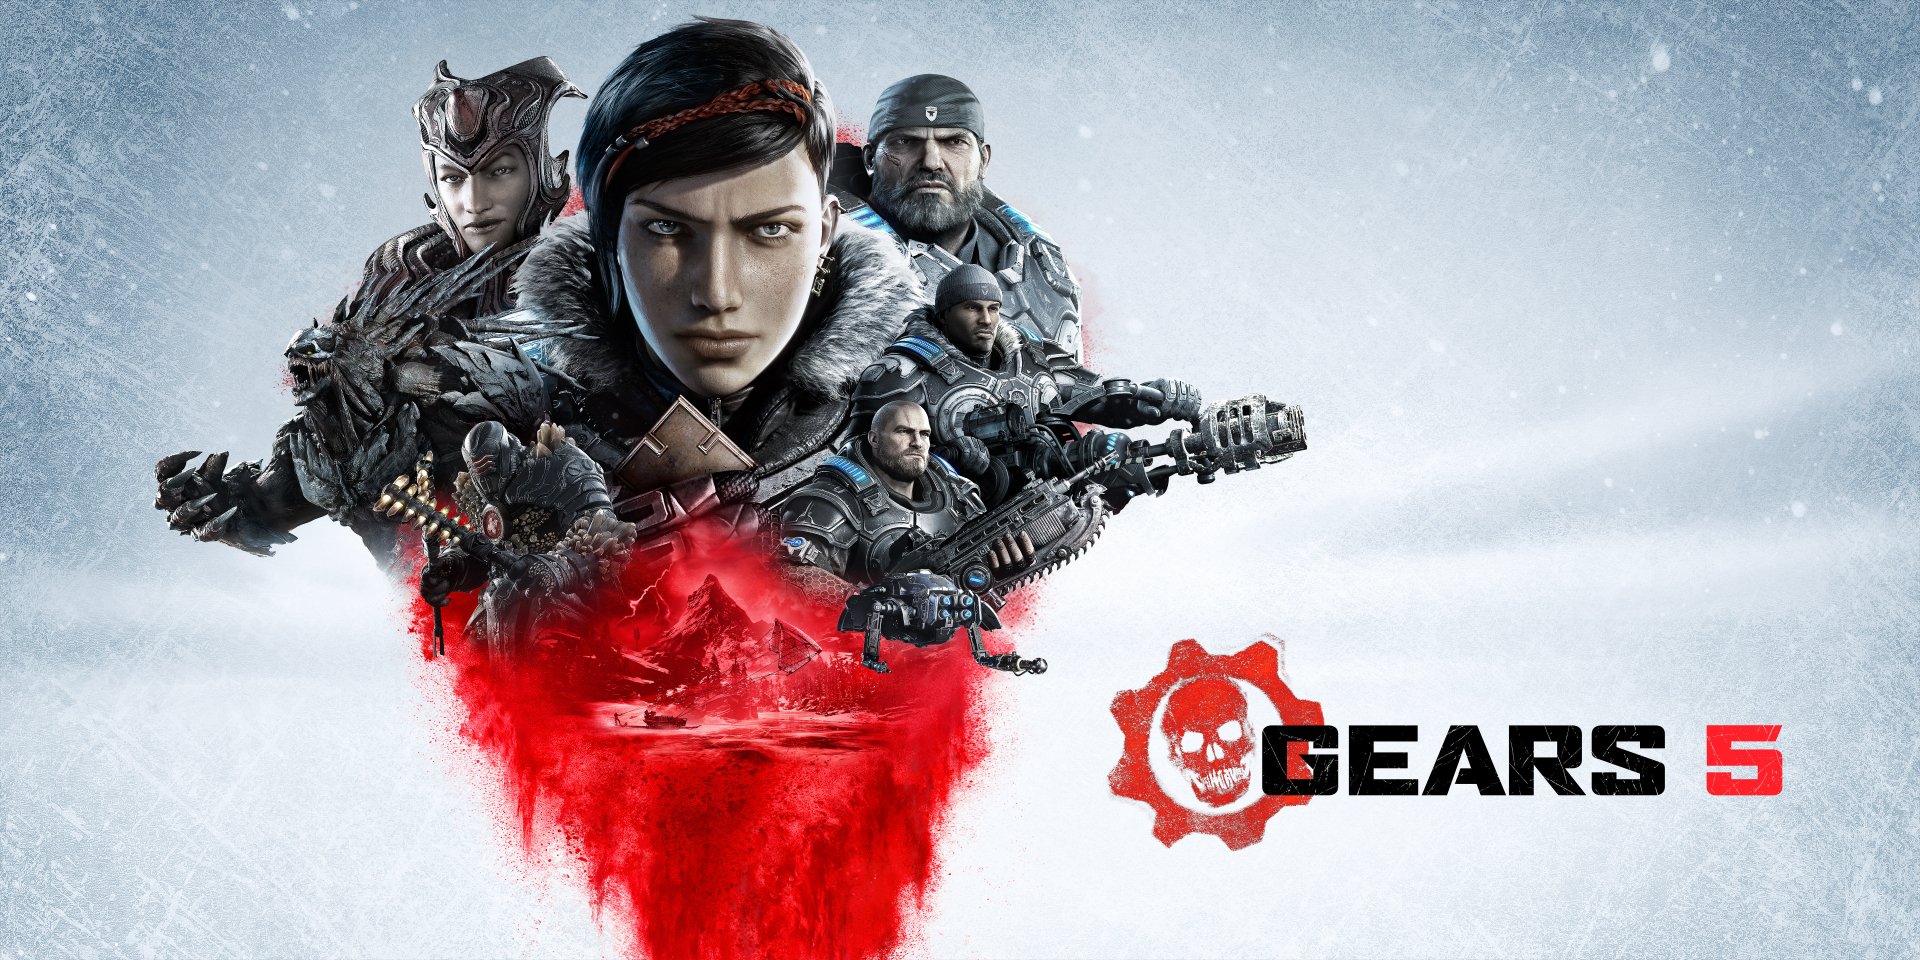 79 Gears 5 Hd Wallpapers | Background Images - Wallpaper Abyss